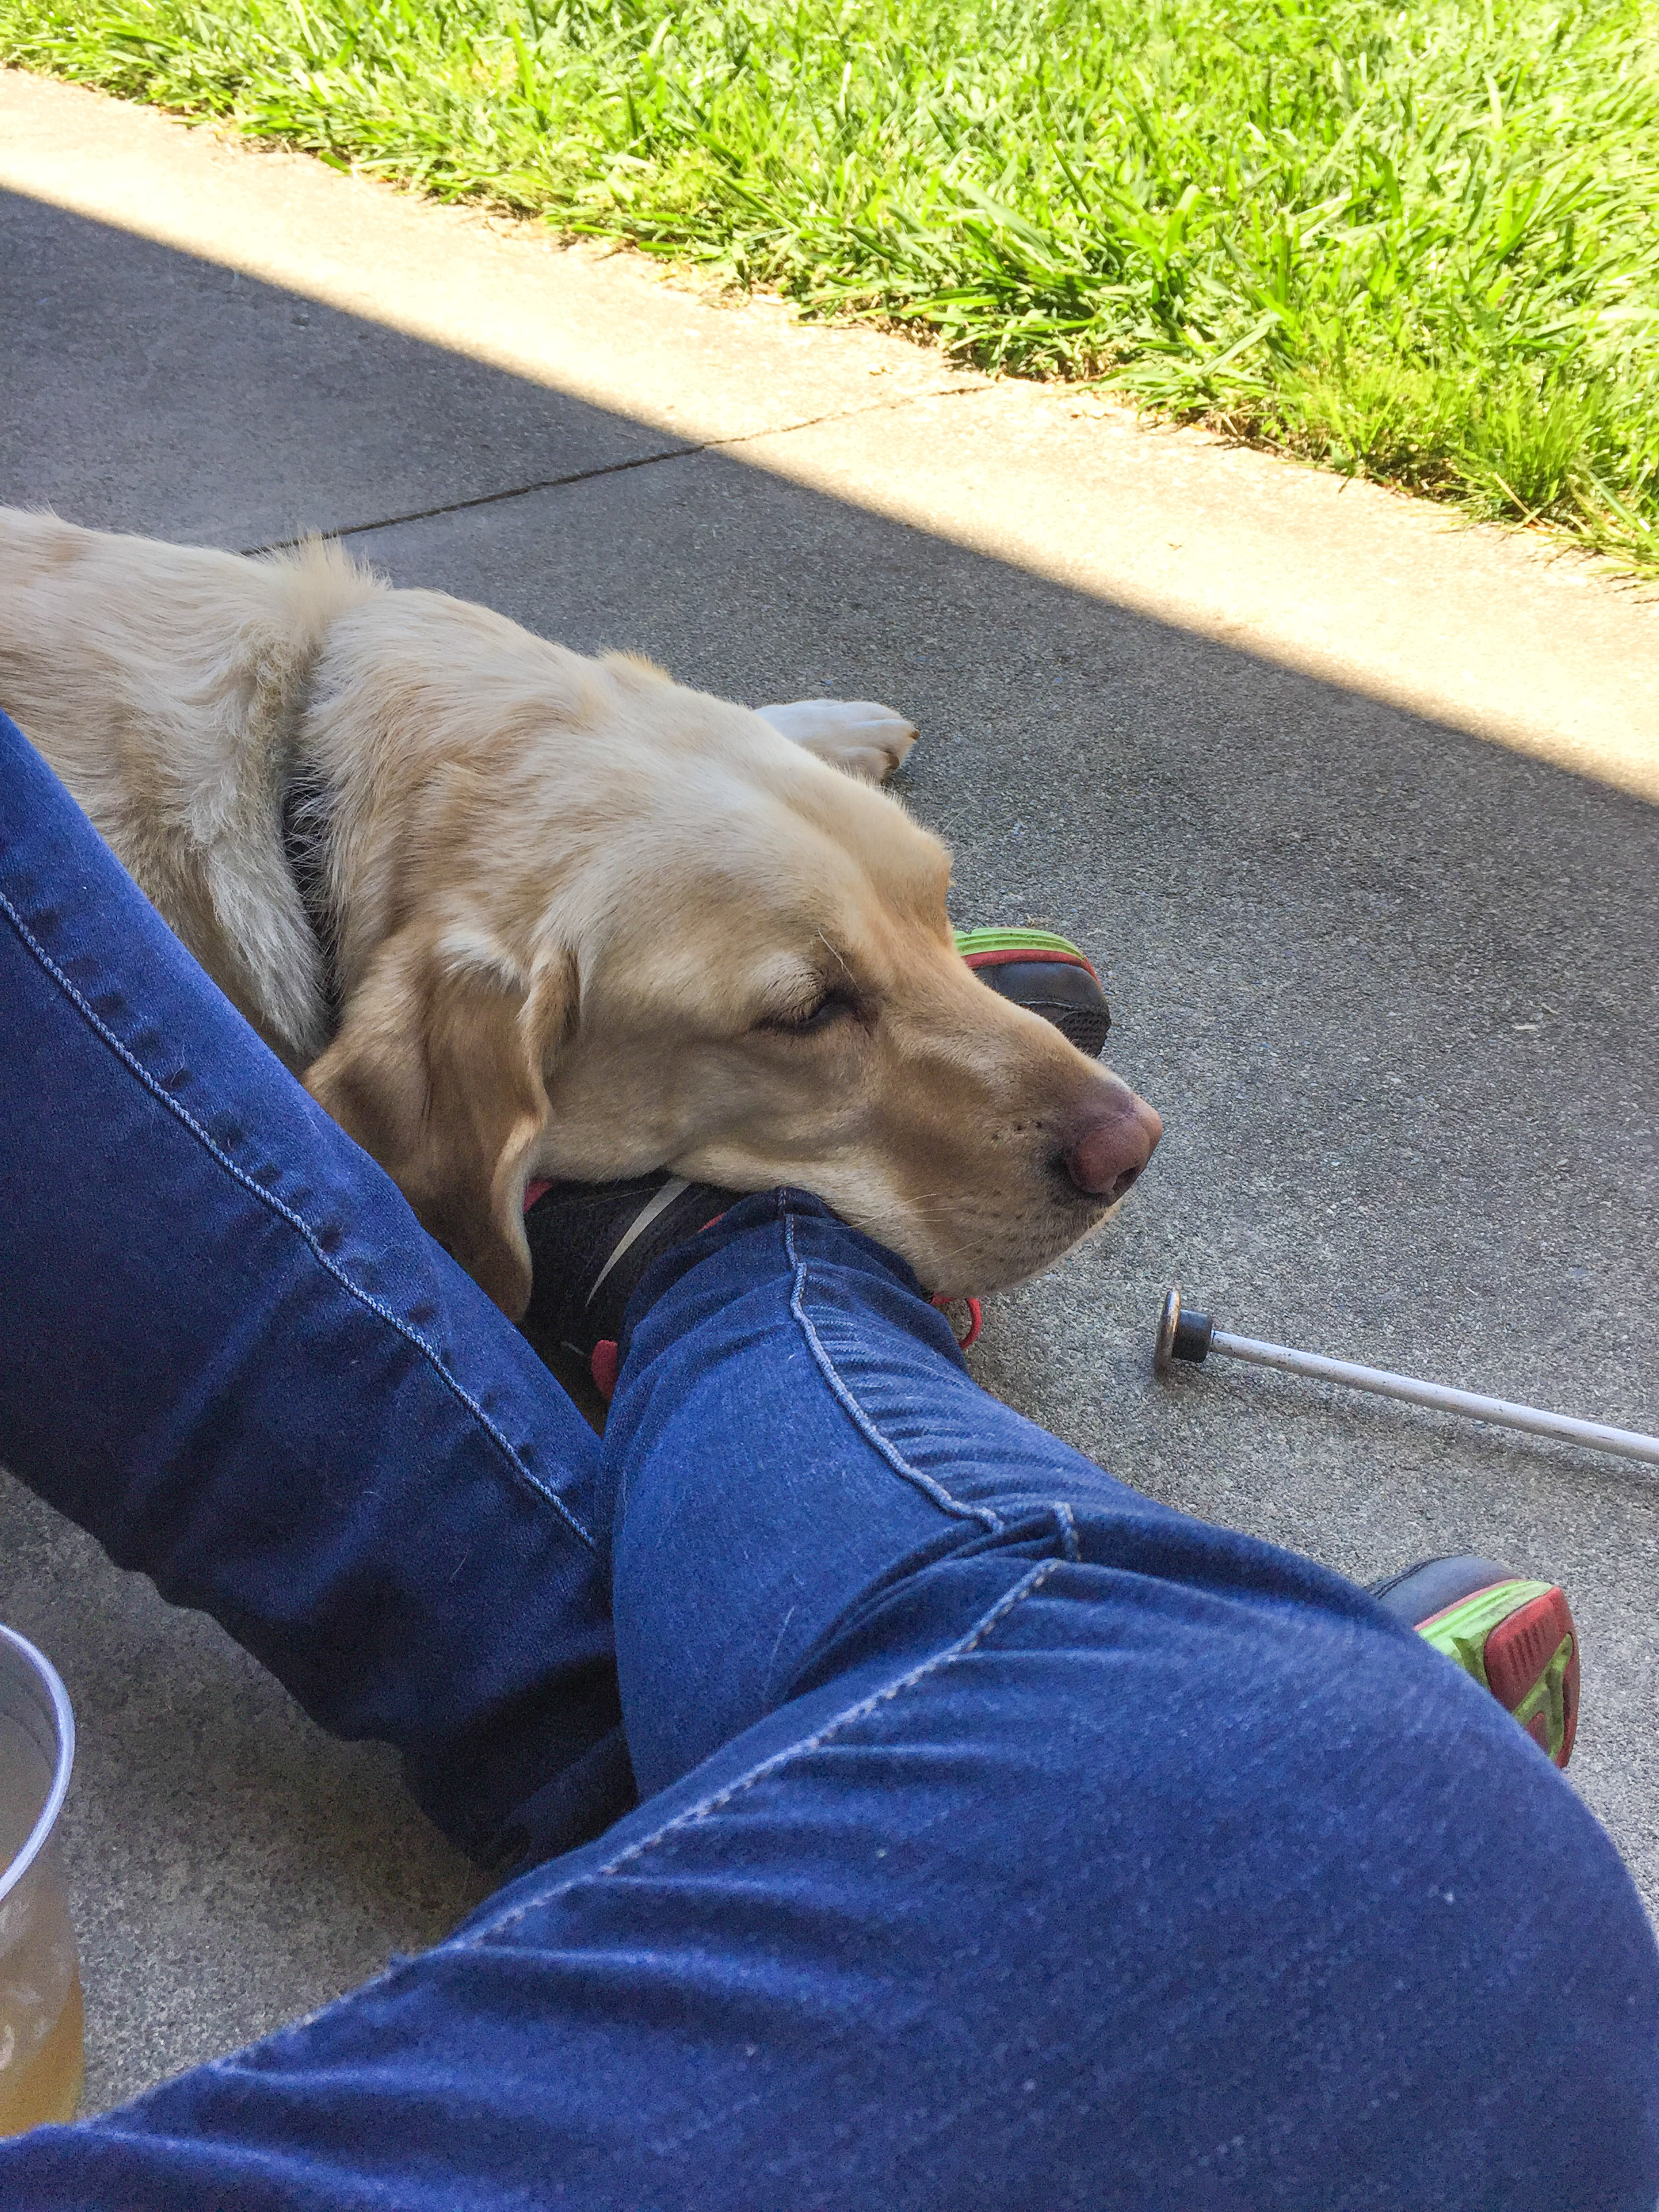 After a long day of exploring the Faire, a yellow lab guide dog rests its head on a participant's leg.